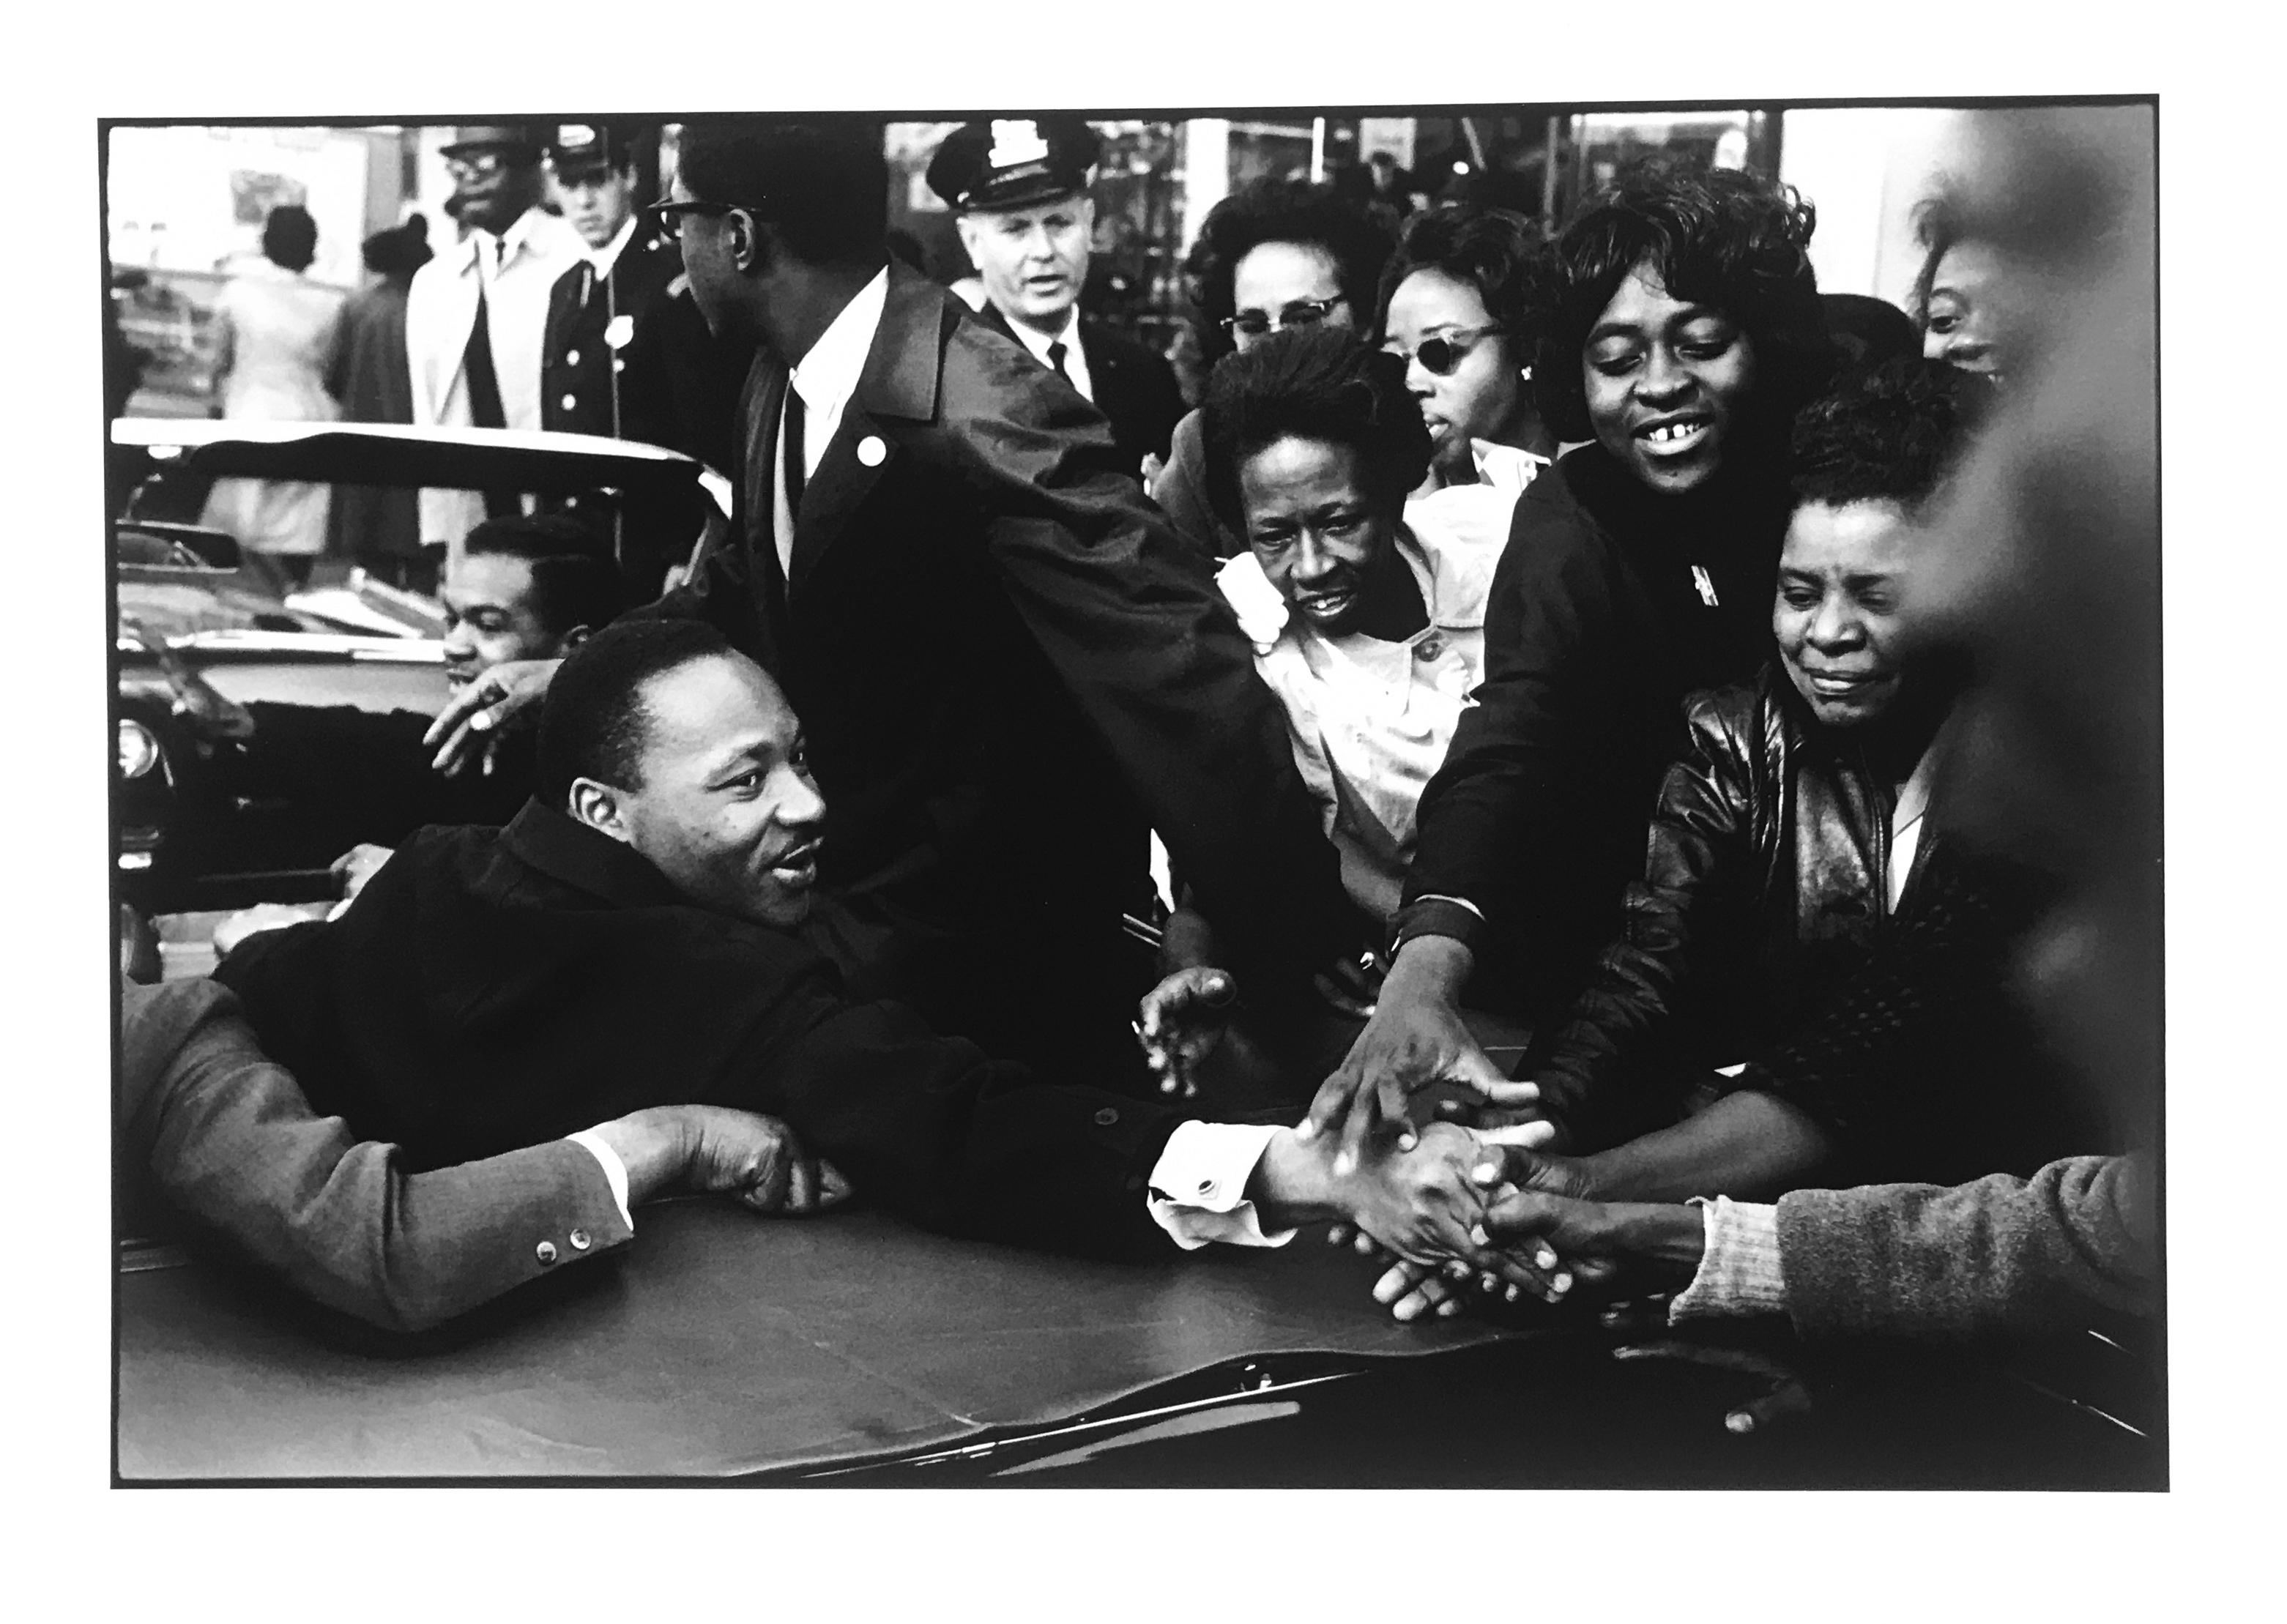 Leonard Freed Portrait Photograph - Martin Luther King, Black and White Limited Edition Photography of MLK 1960s